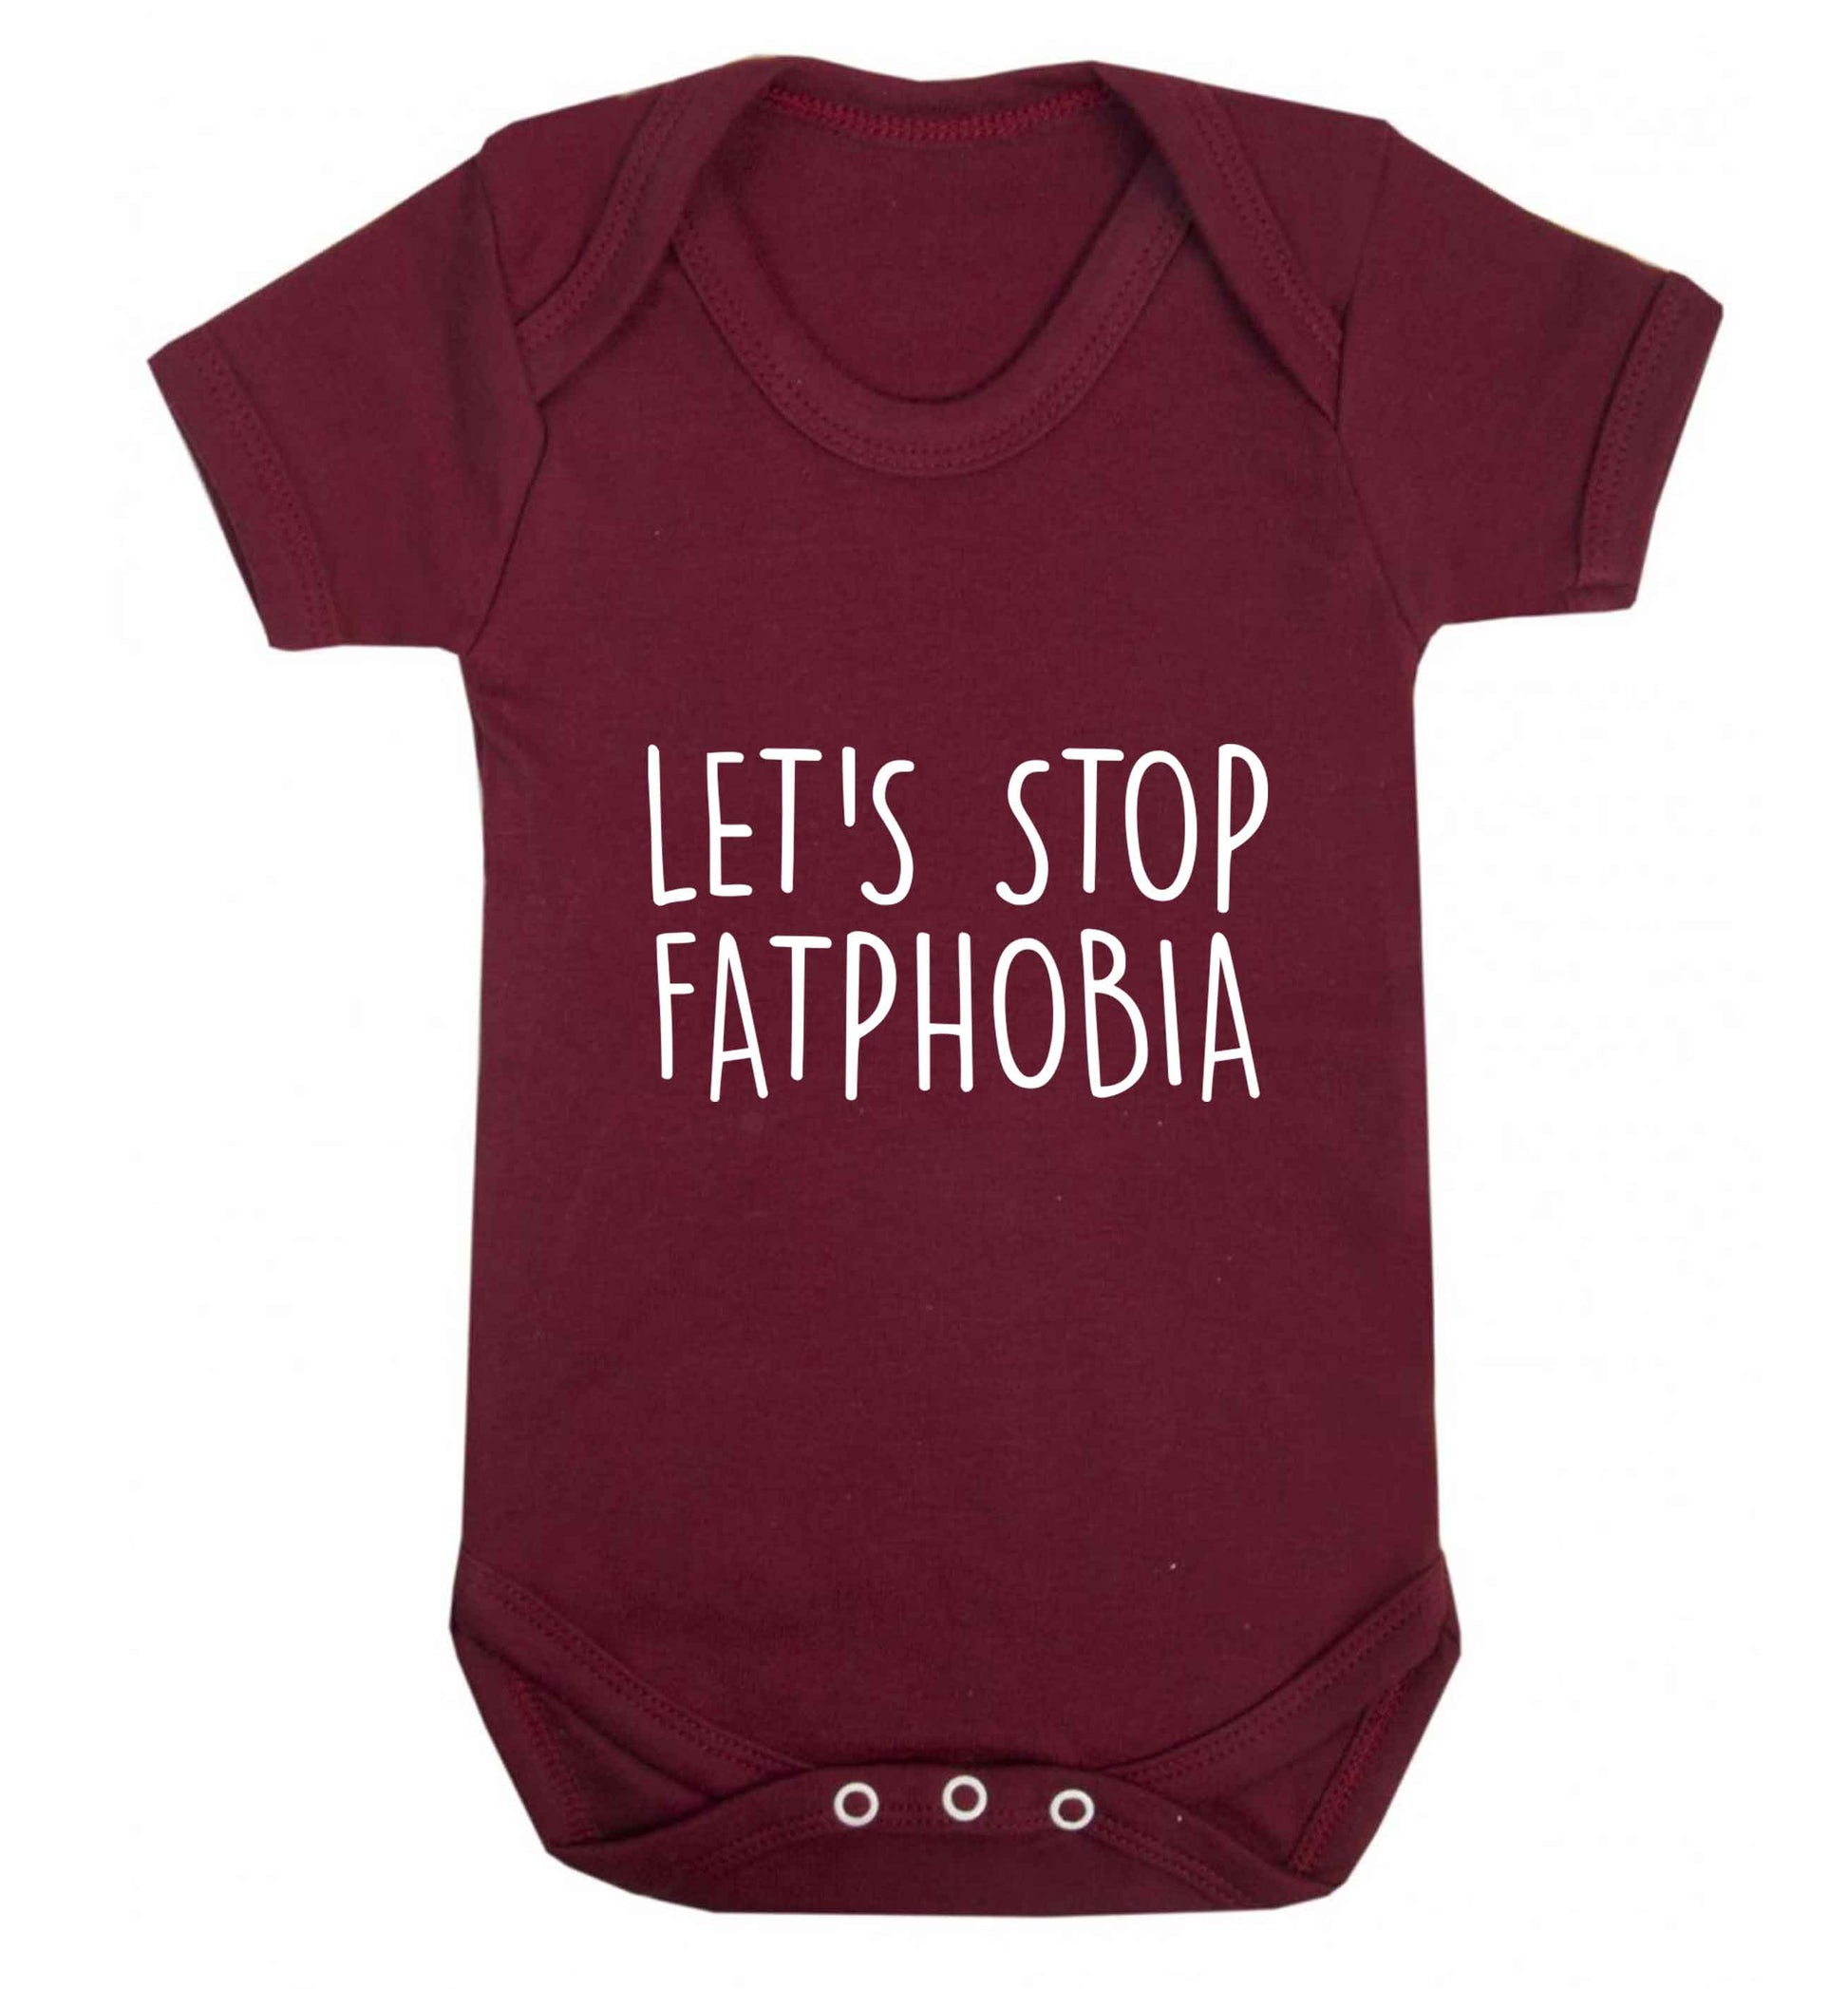 Let's stop fatphobia baby vest maroon 18-24 months